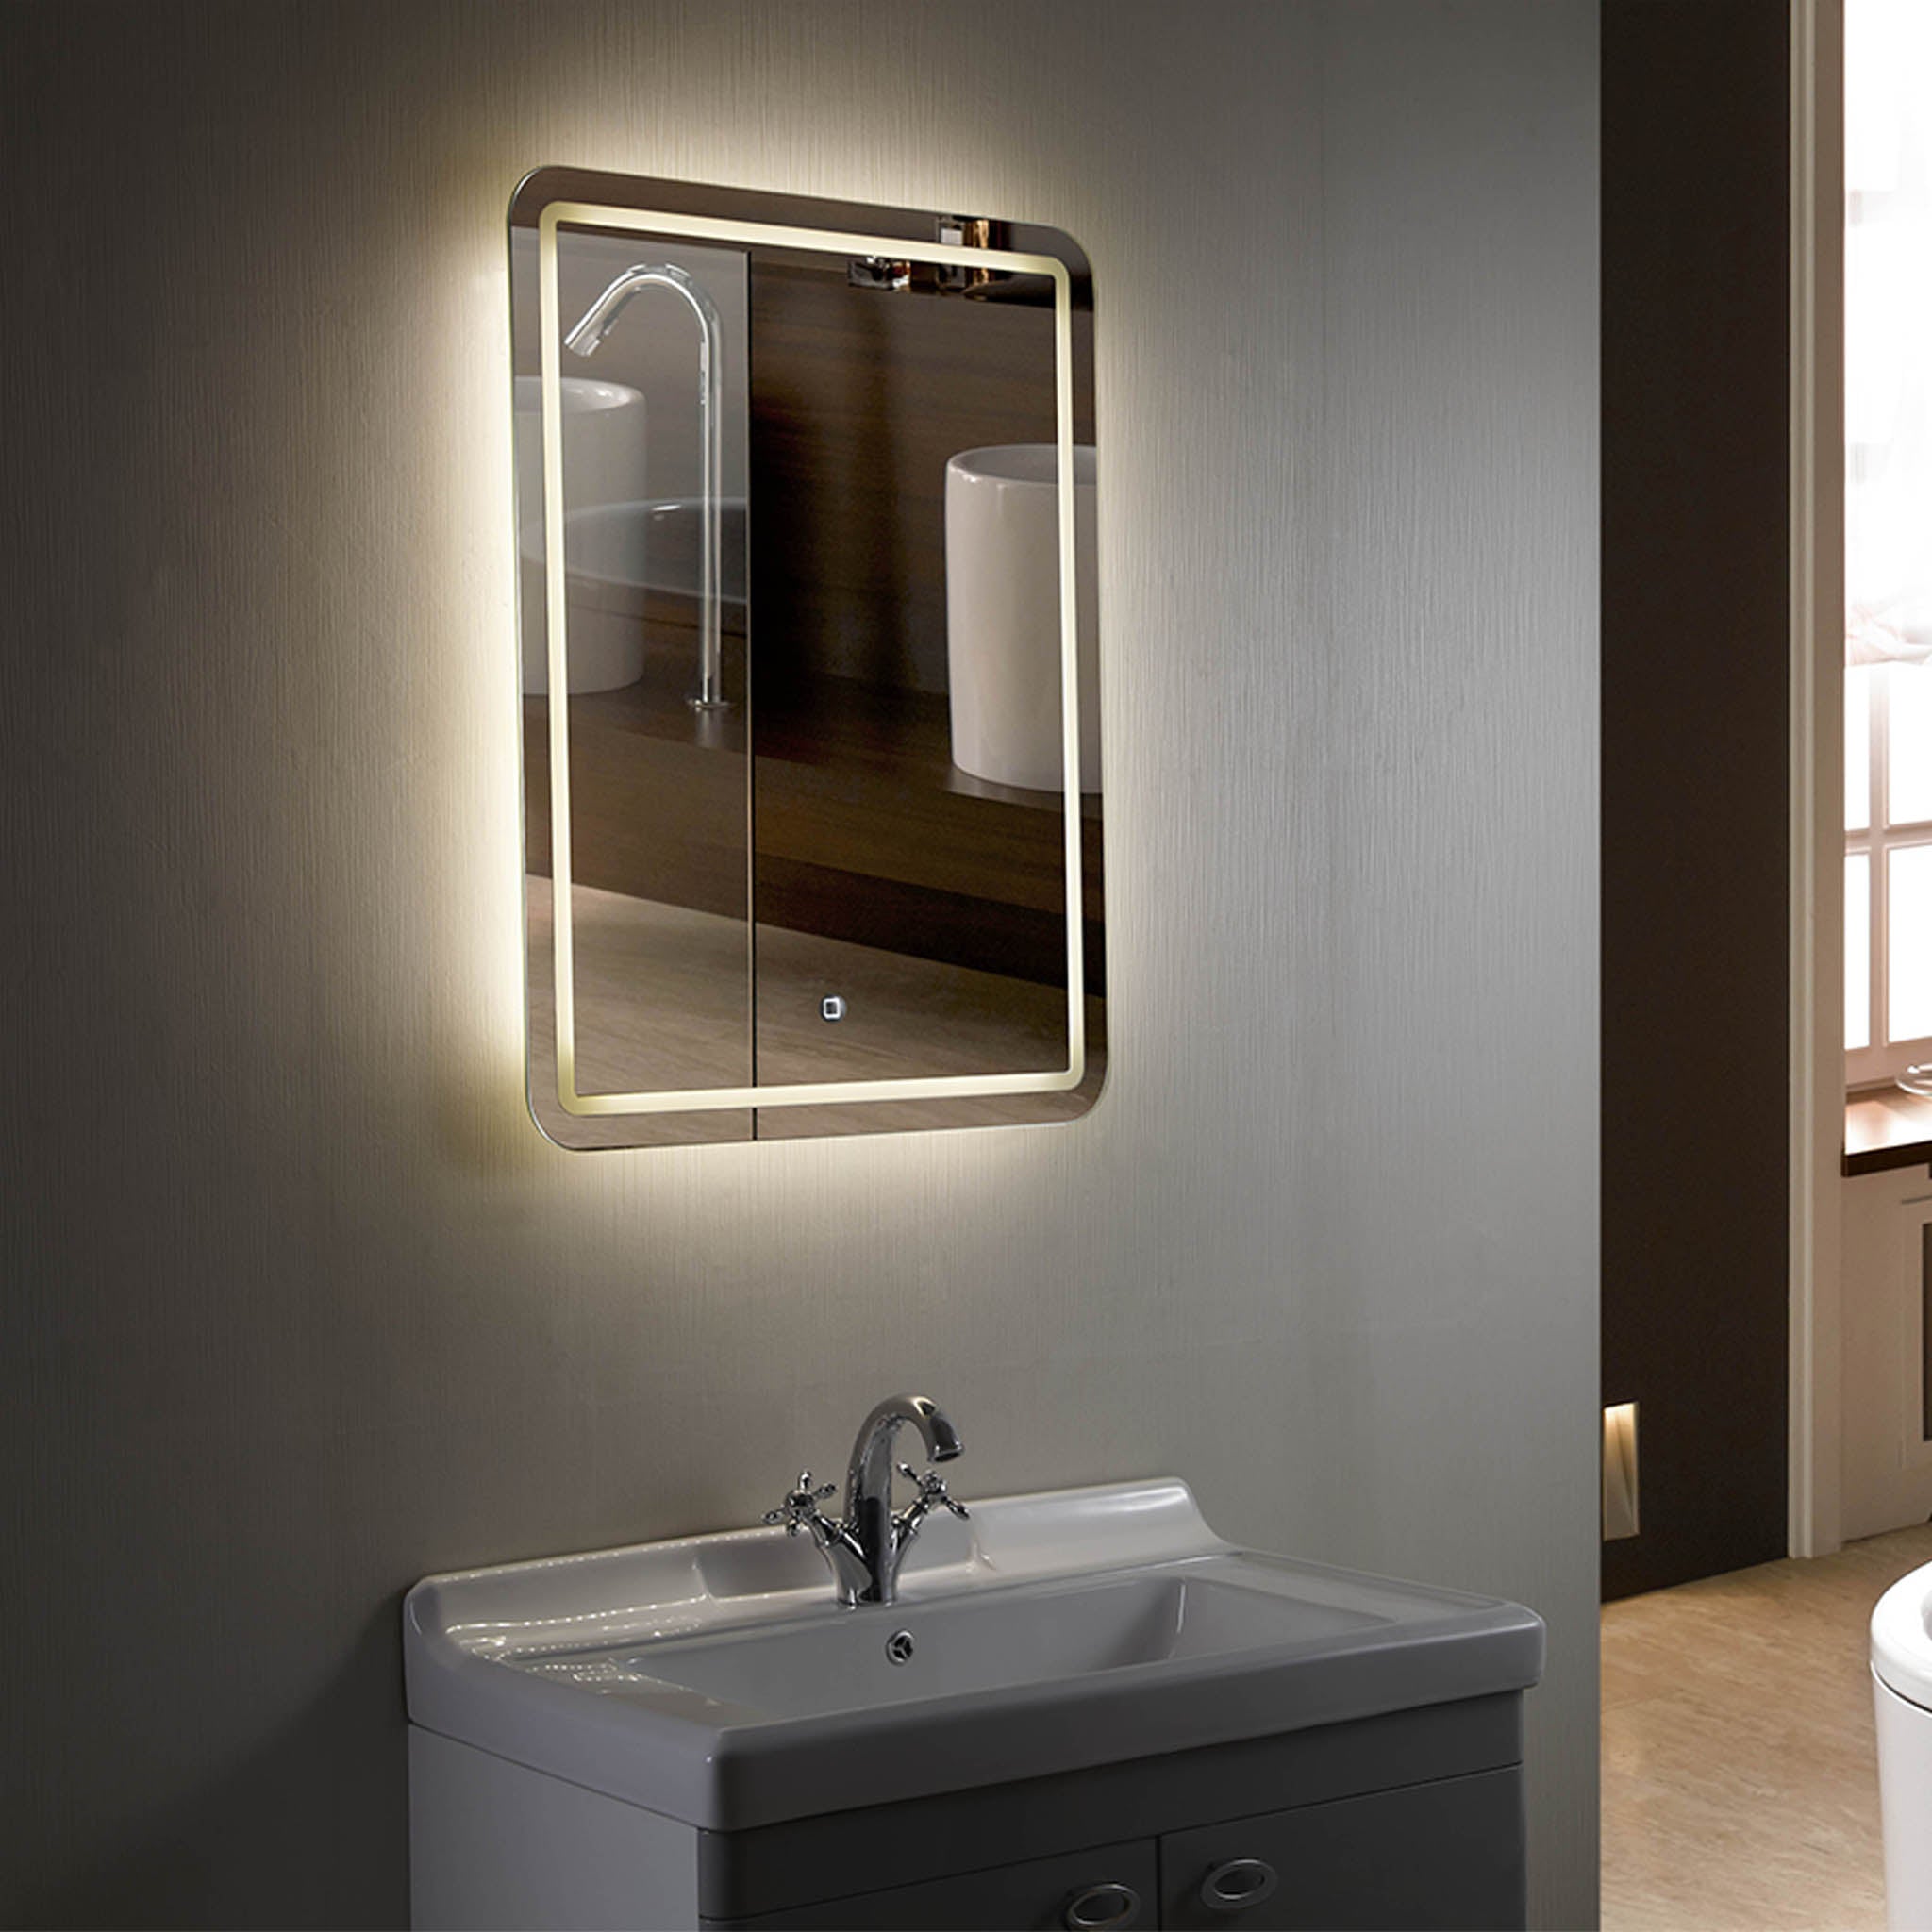 Aquamoon LED Mirror 1989 With Touch On/Off Button, Round Corner Design With Front and Back Illumination 72W x 36H